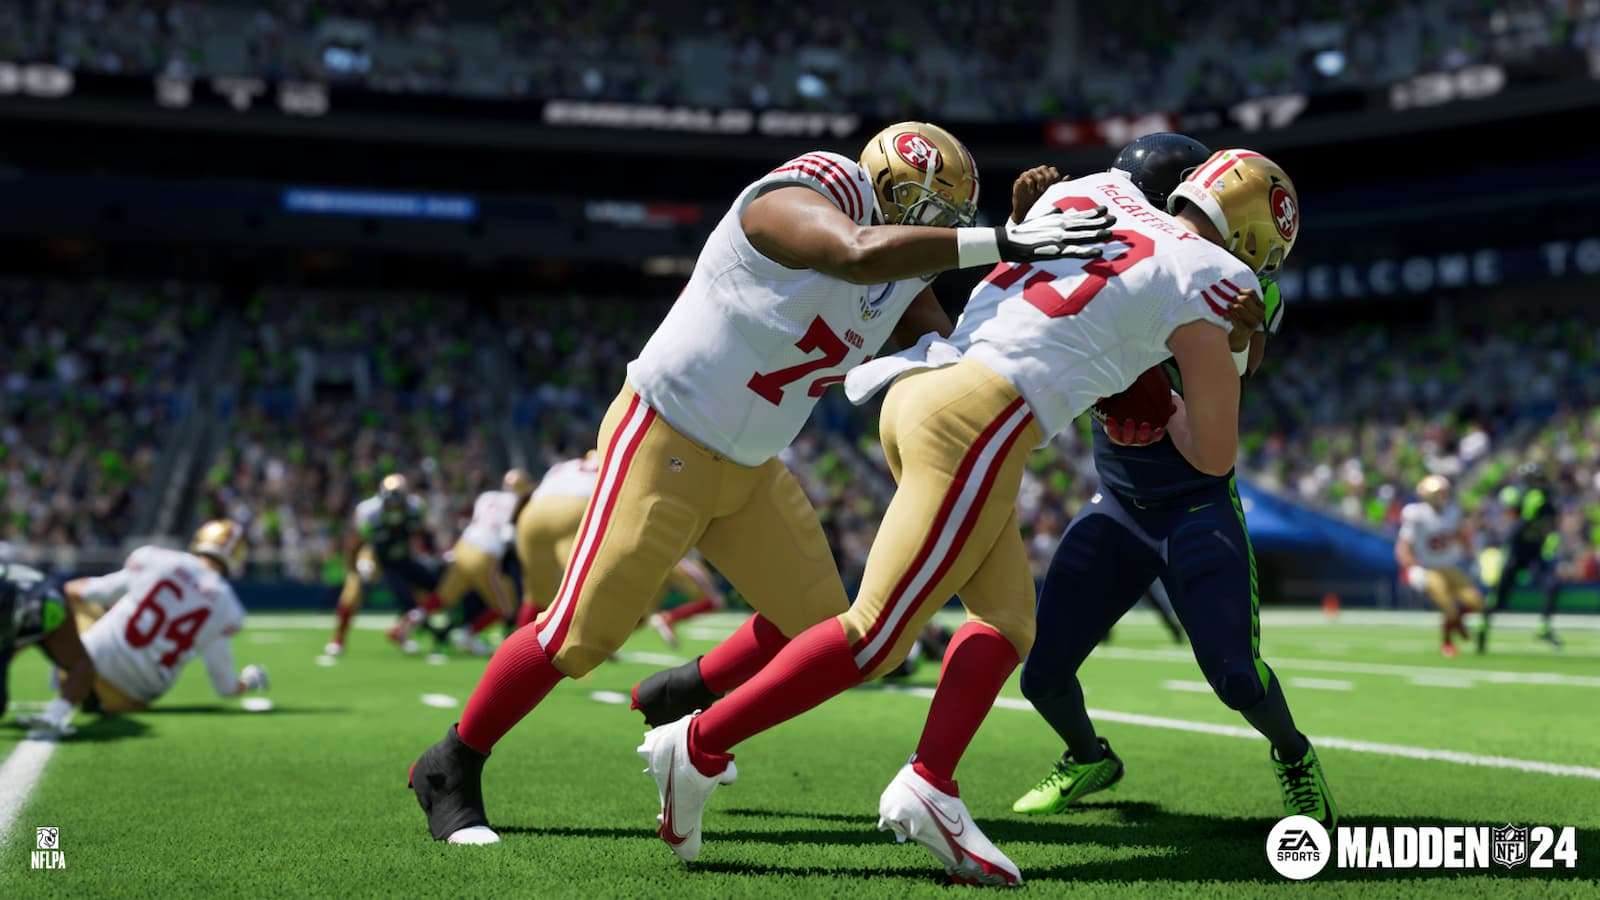 49ers and Seahawks players in Madden 24